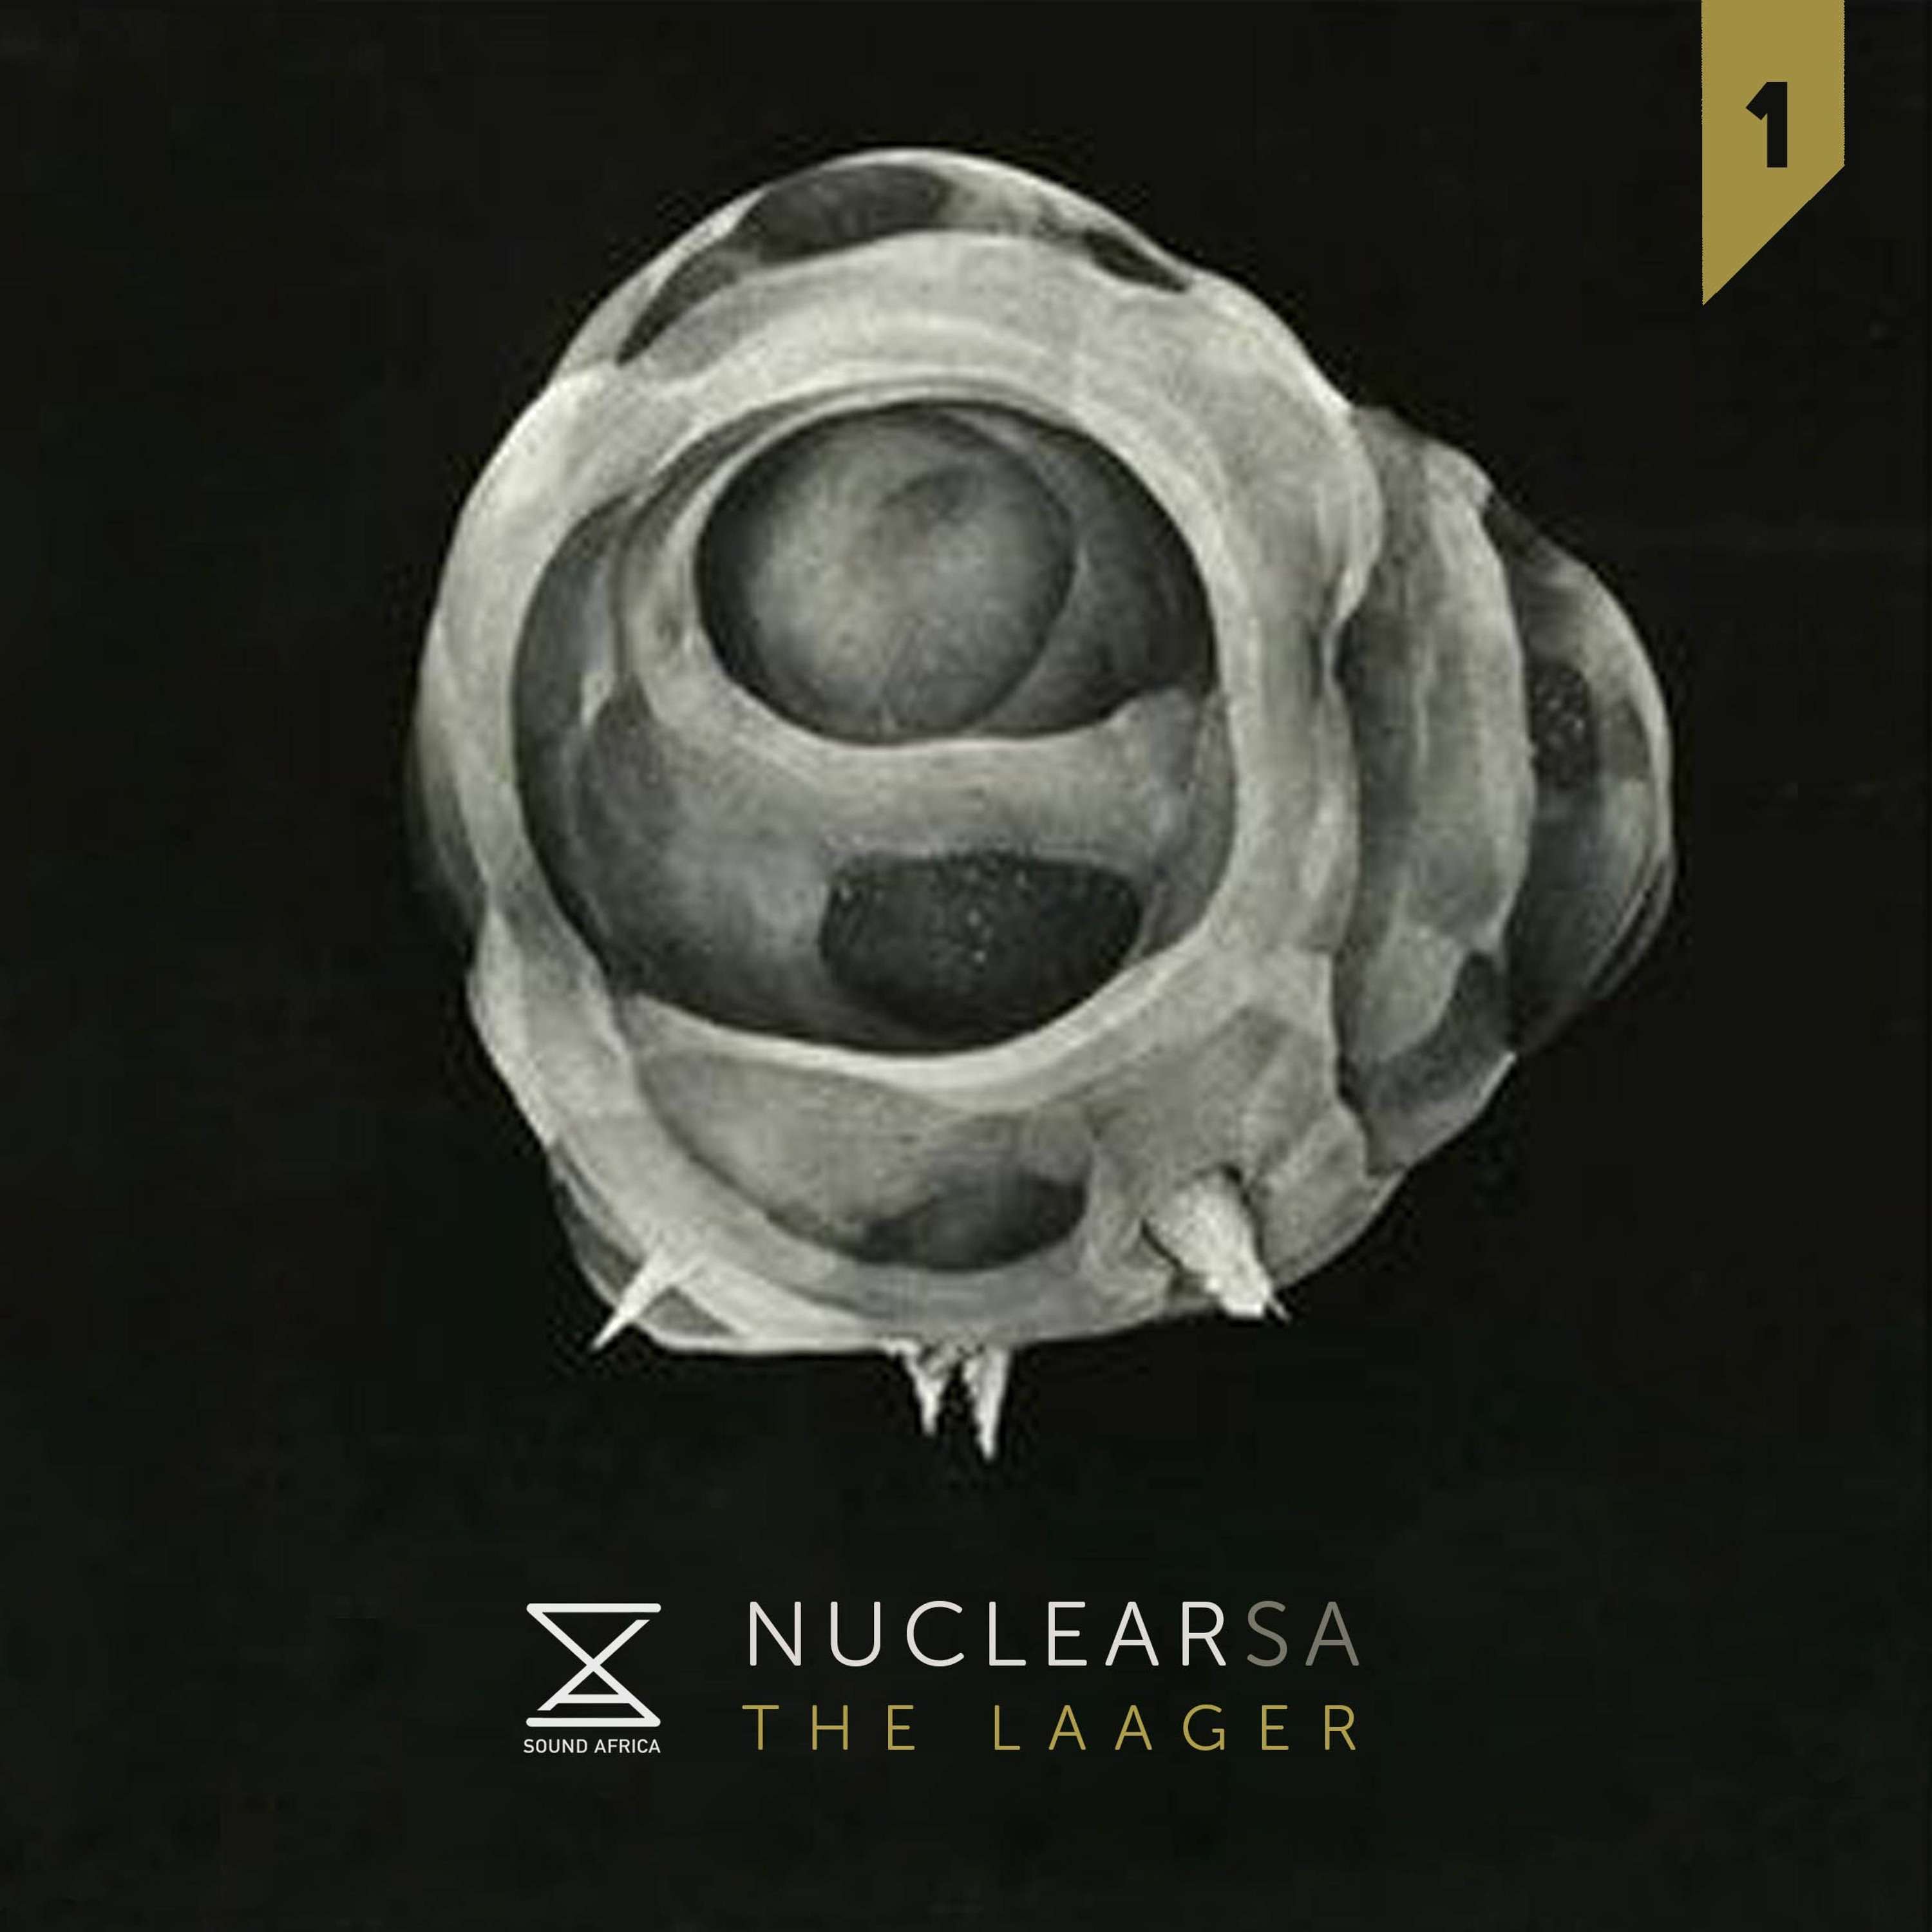 Nuclear SA: The Laager